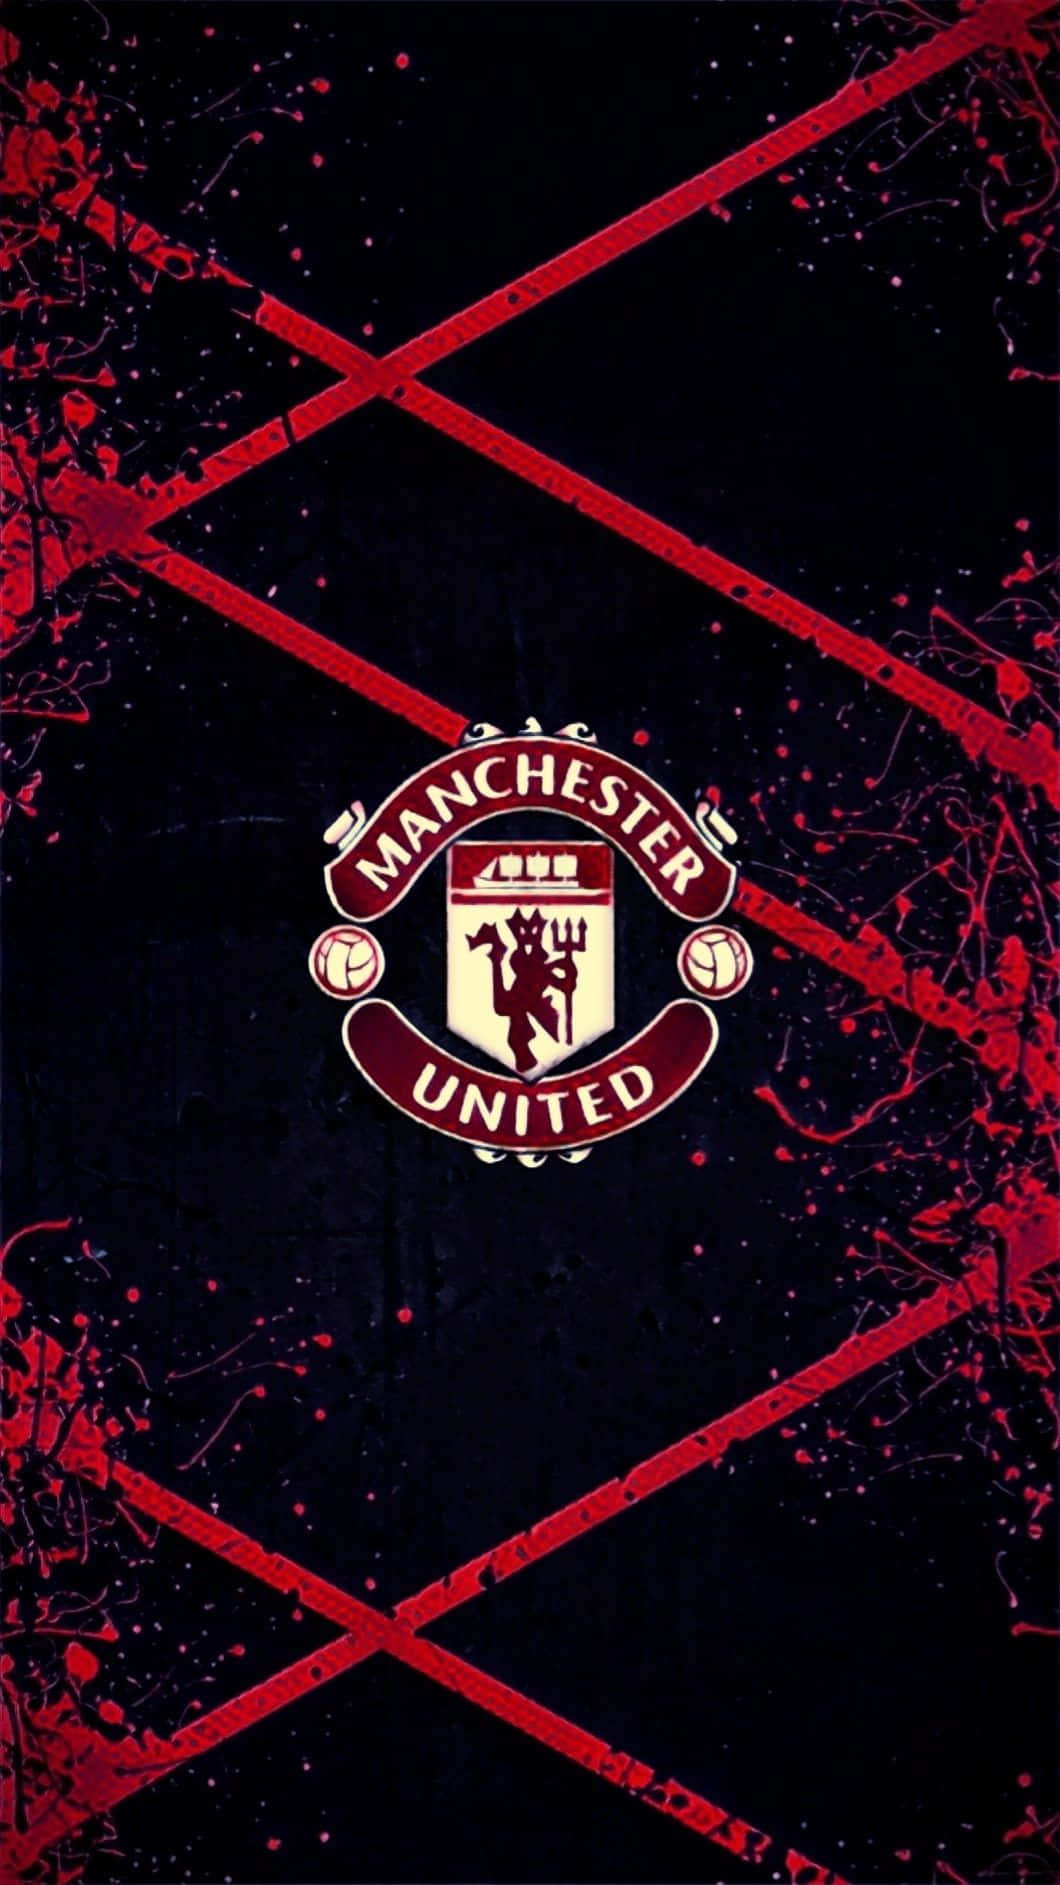 Brighten Your Day With Manchester United Football Club Spirit On Your Iphone Background